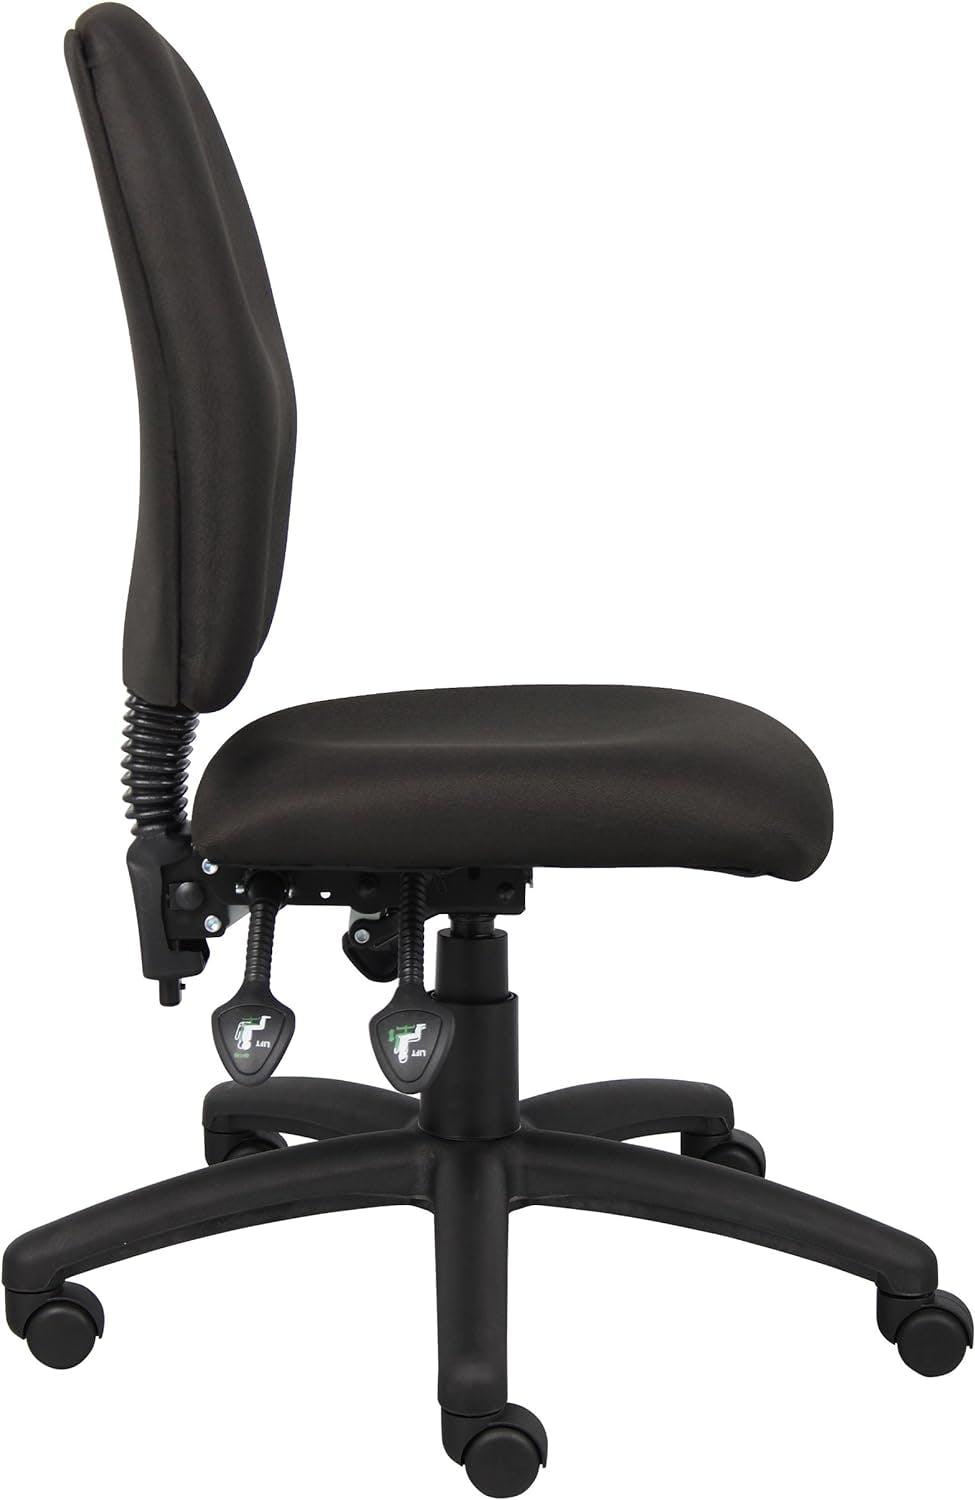 Adjustable Swivel Task Chair in Black Fabric with Lumbar Support